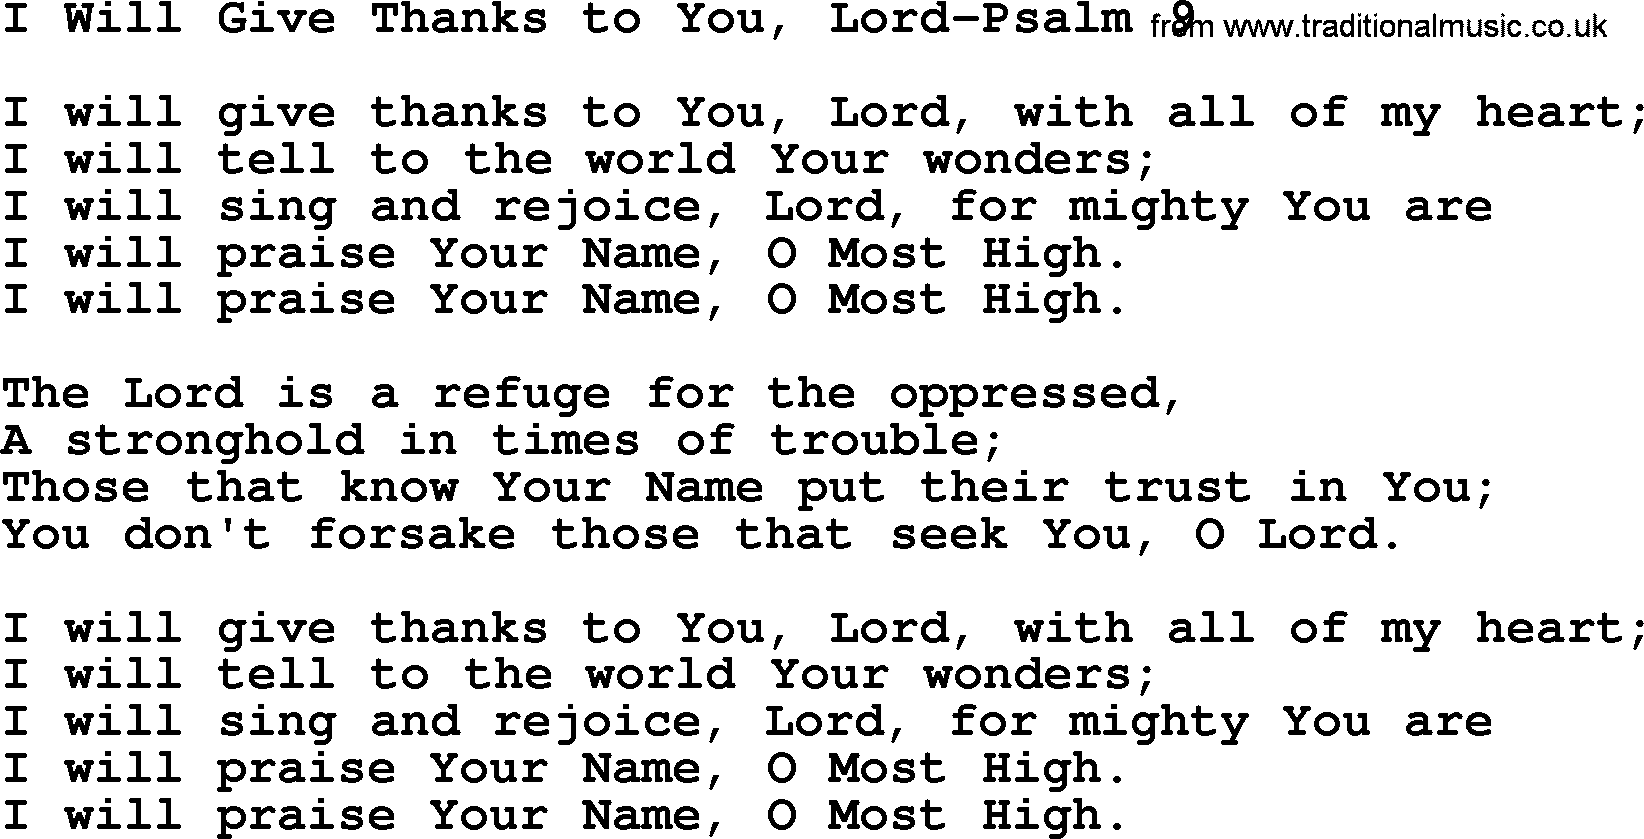 Hymns from the Psalms, Song: I Will Give Thanks To You, Lord-Psalm 9